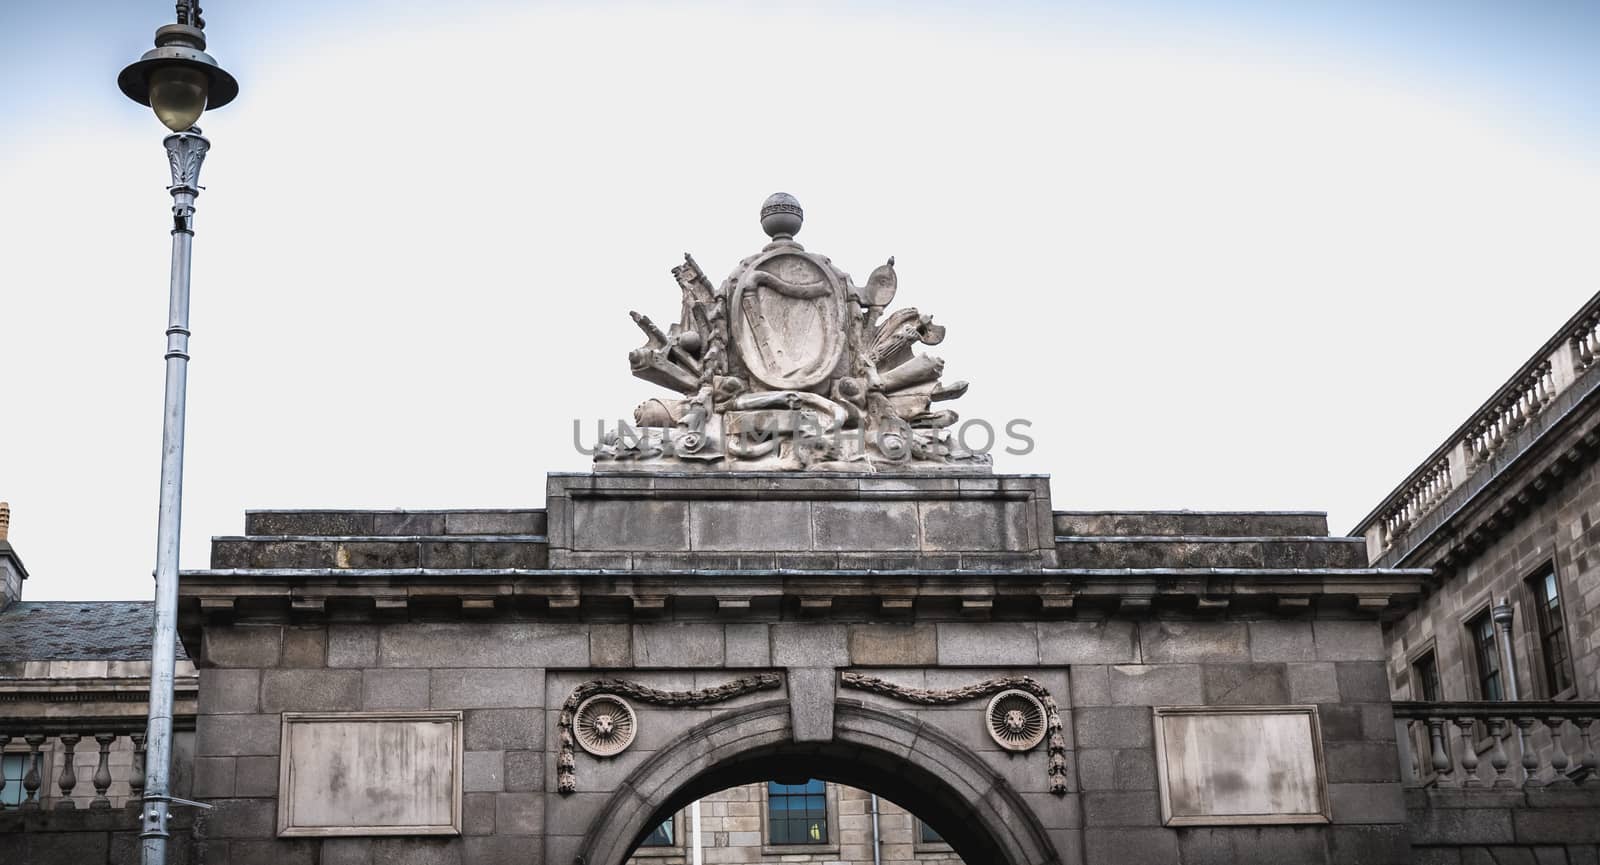 Dublin, Ireland - February 11, 2019: Architectural detail of the Dublin Four Court Courthouse on a winter day